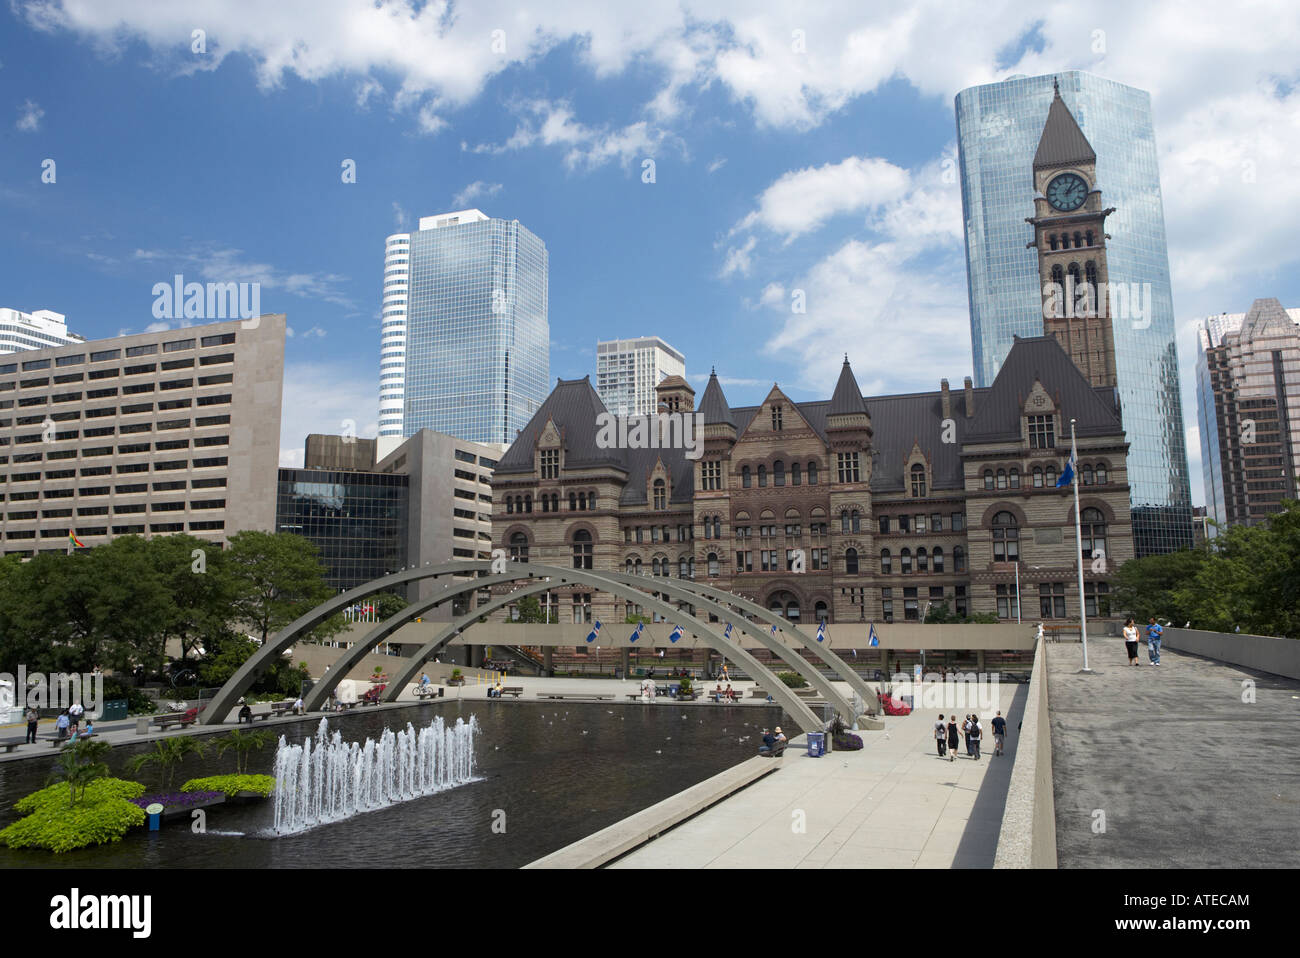 The Nathan Phillips Square and the Old City Hall, Toronto, Canada Stock Photo